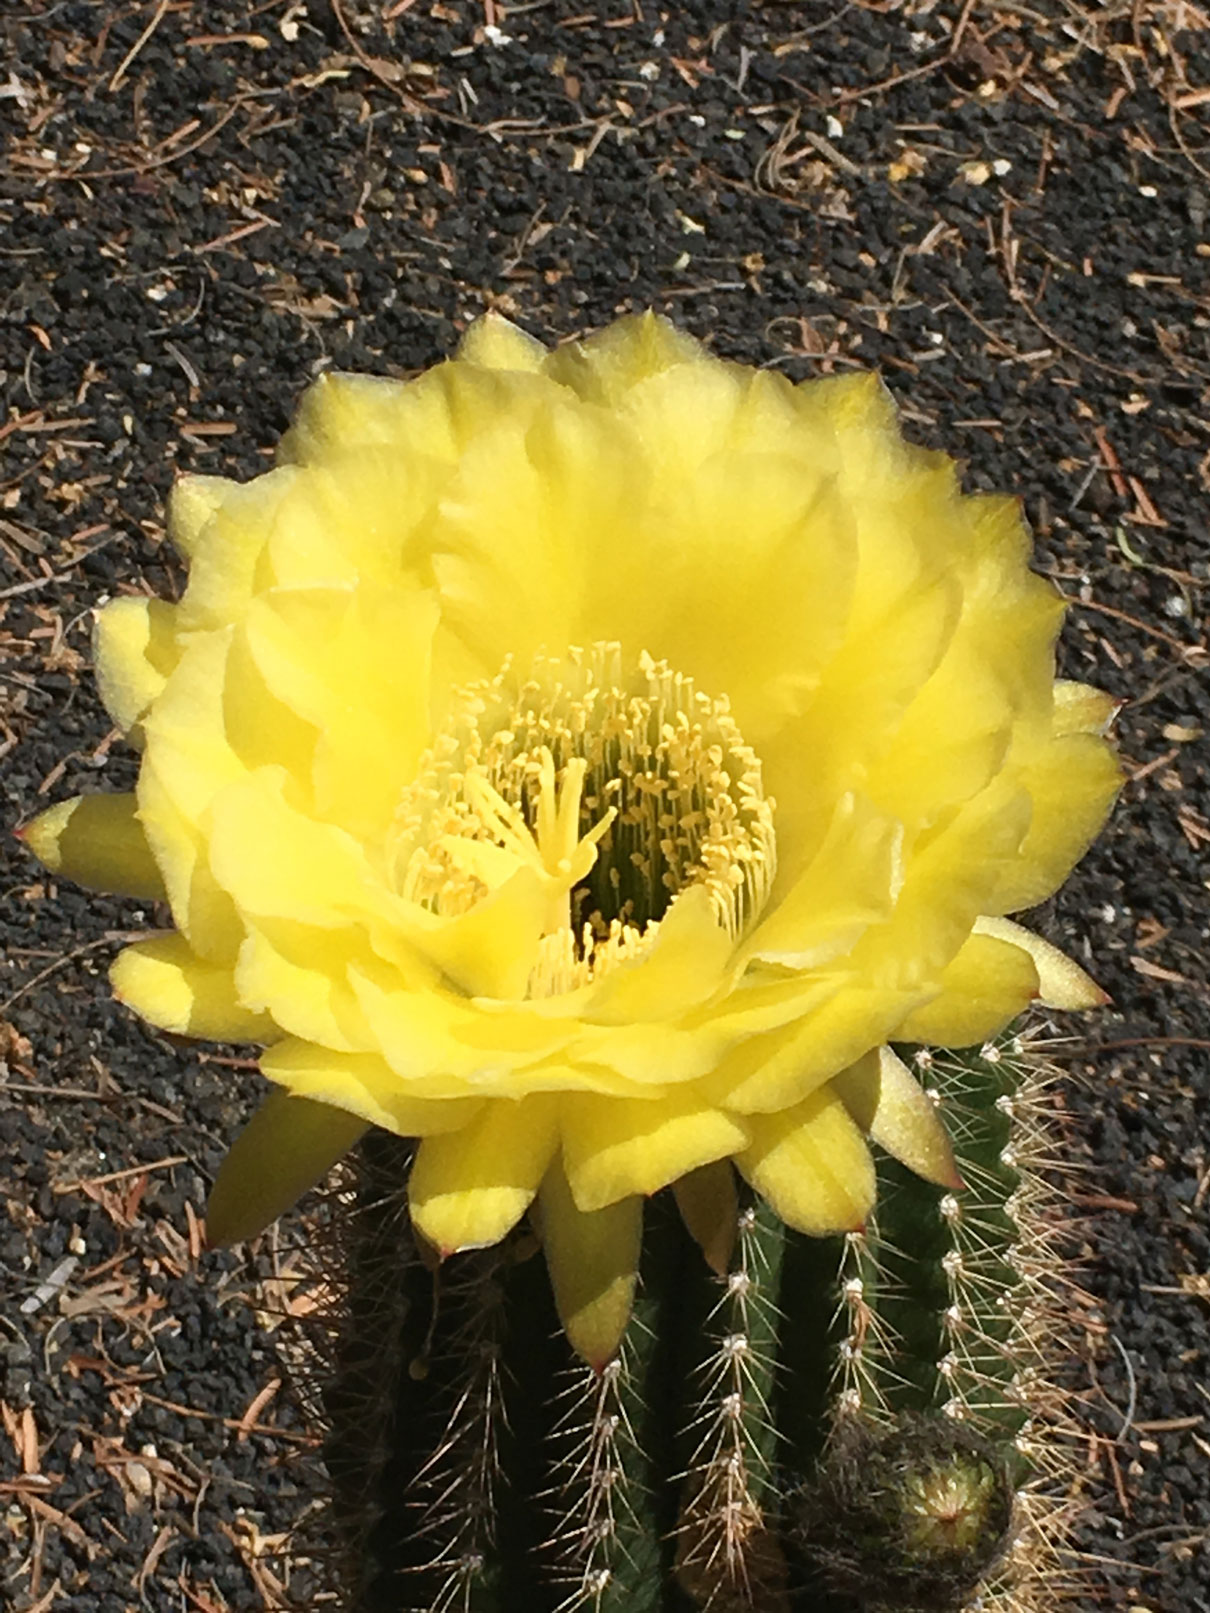 A bright yellow Torch Cactus bloom.